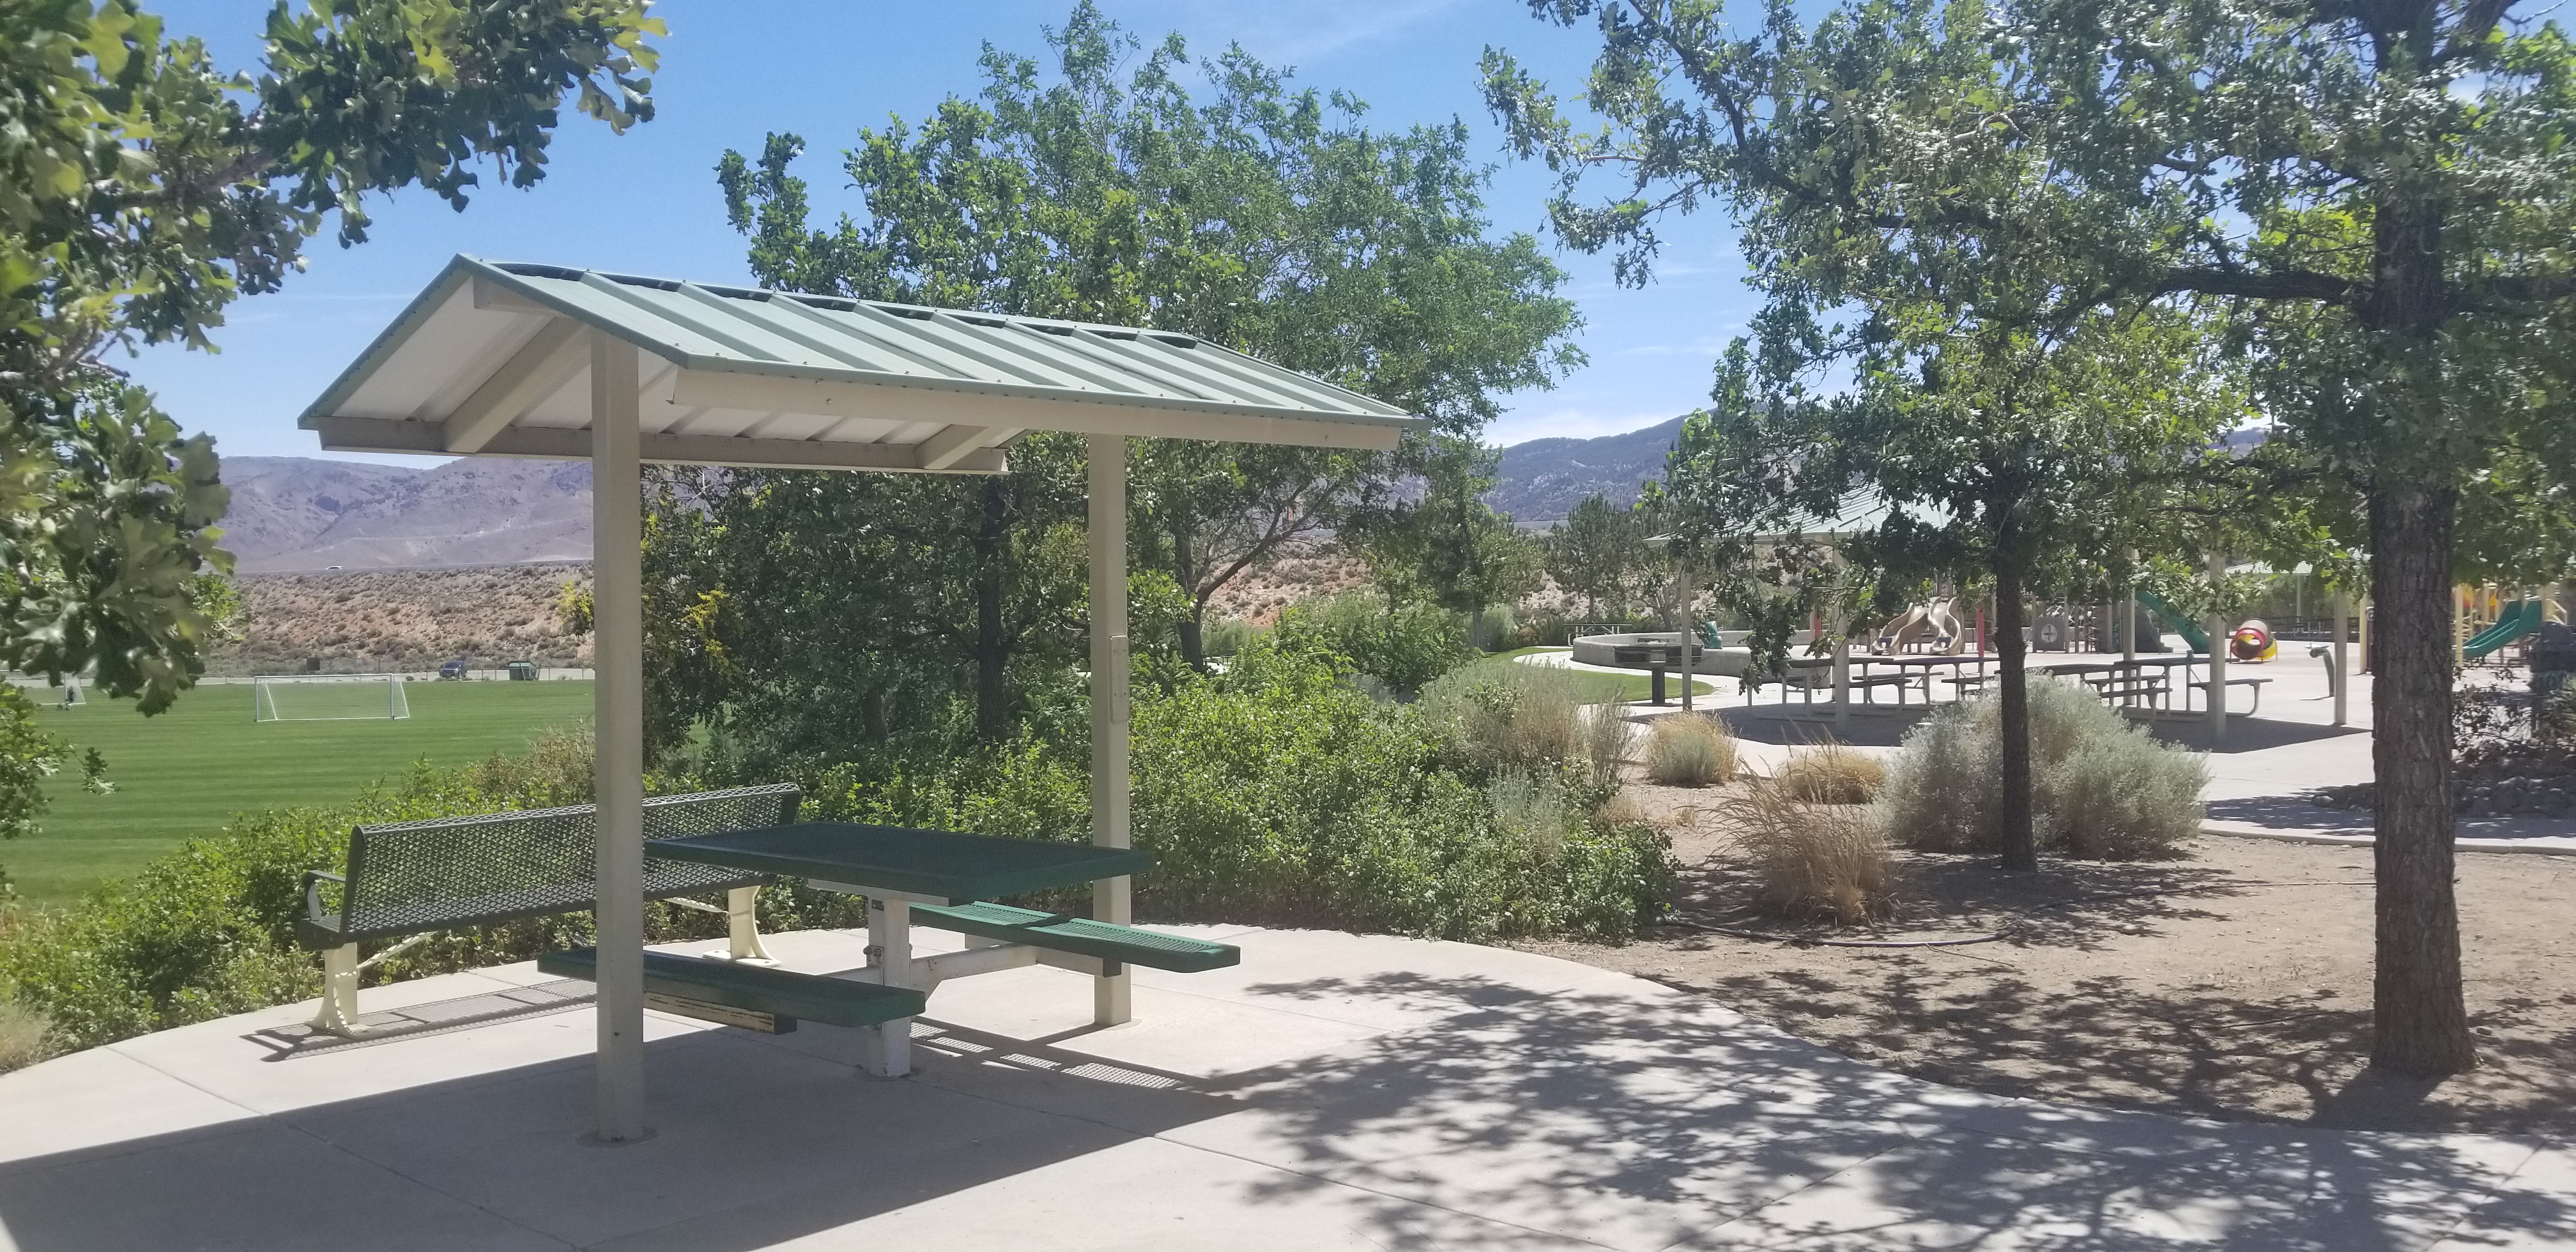 First-Come/First-Served area near the Mt. Rose Pavilion and Children's Playground (non-reservable)